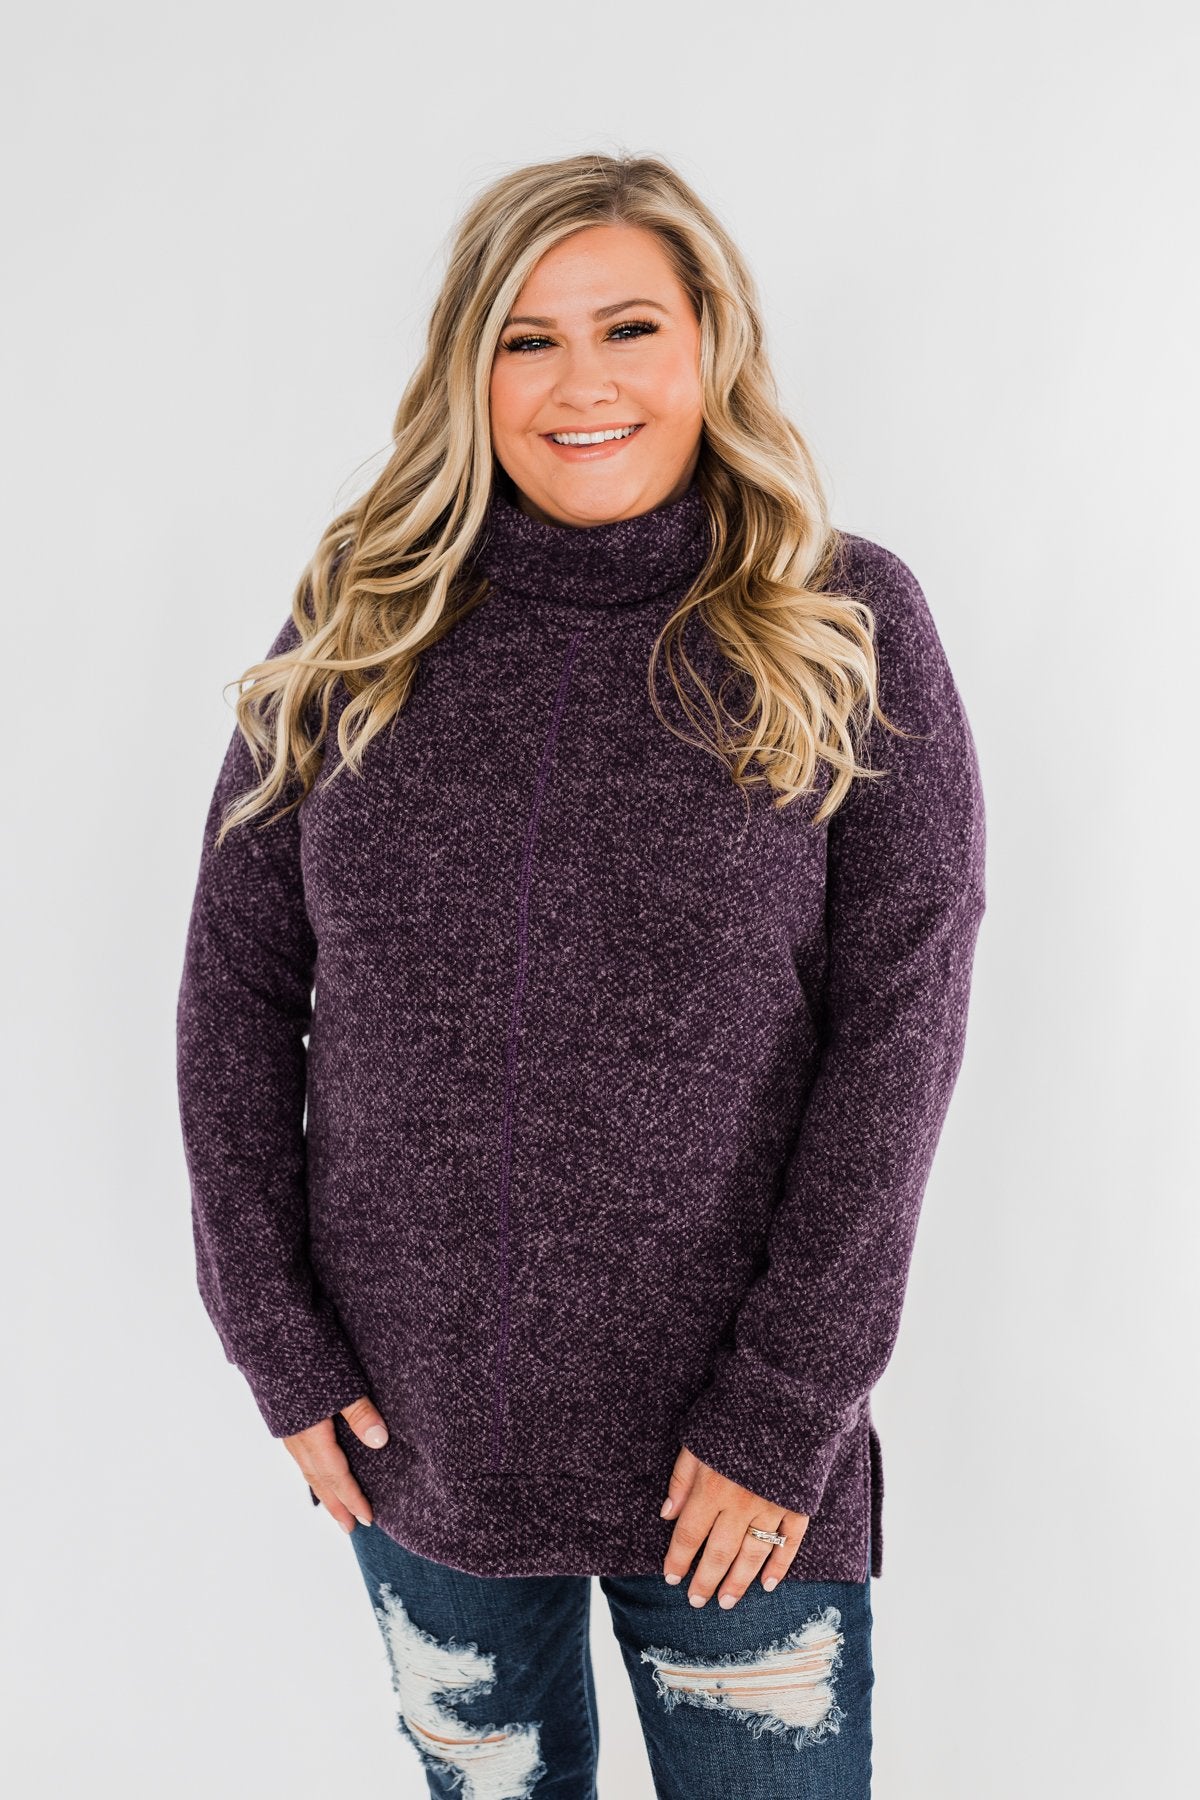 Thinking About You Cowl Neck Sweater- Eggplant